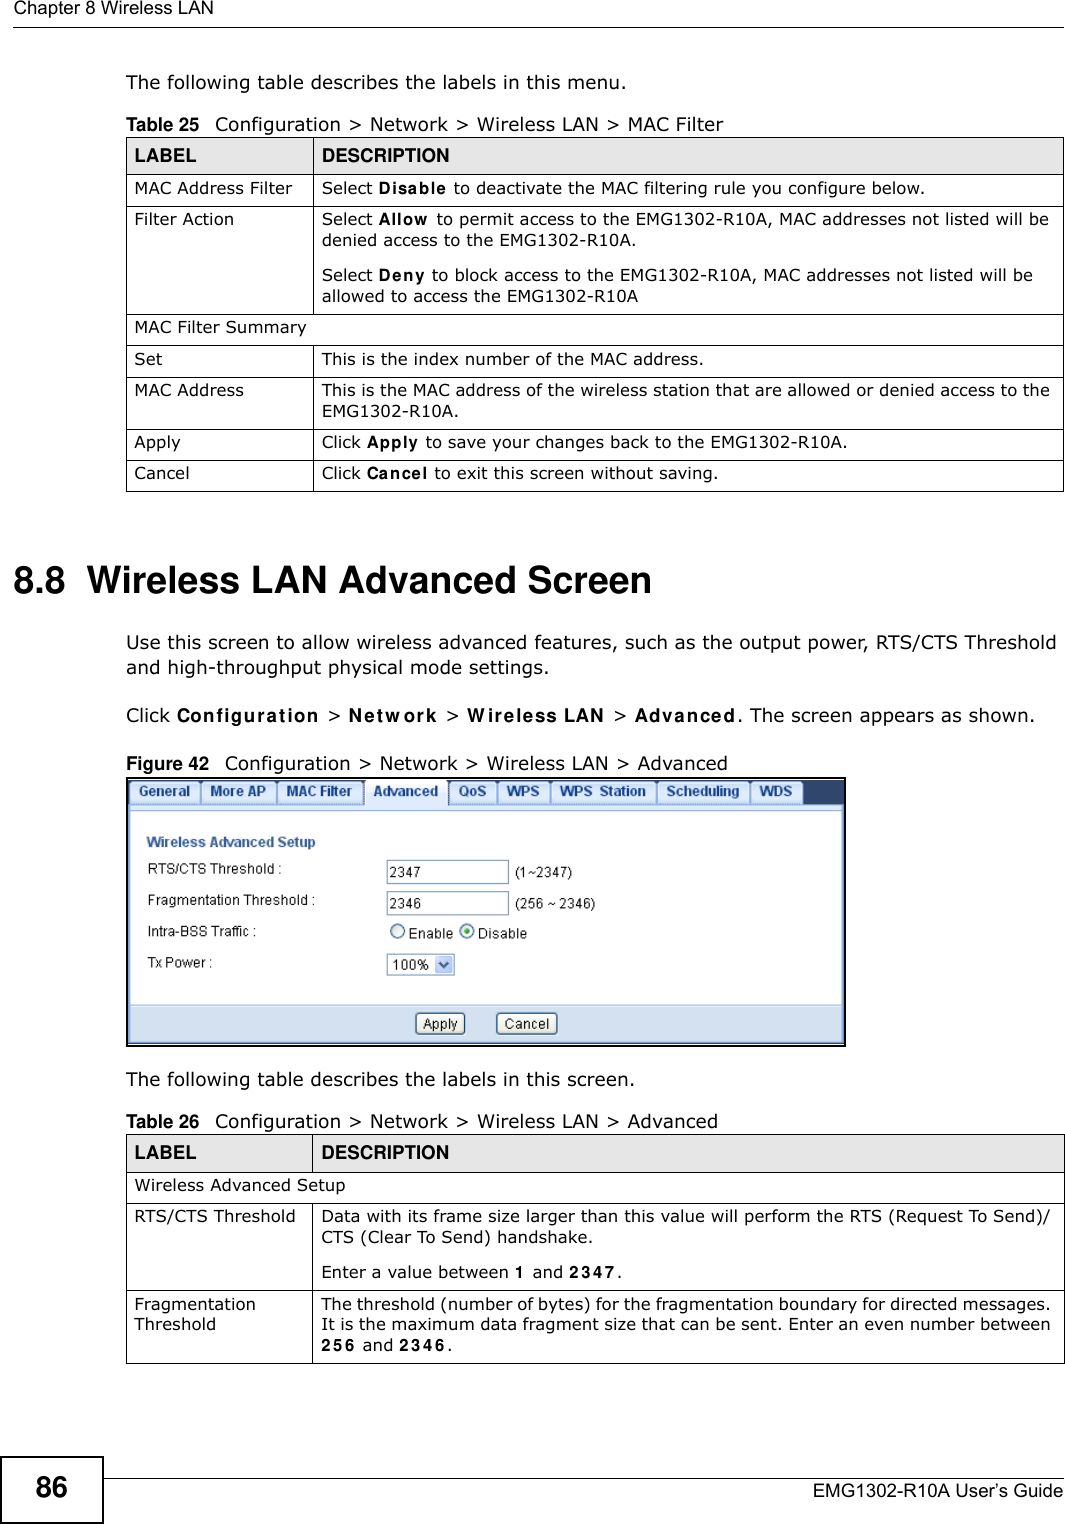 Chapter 8 Wireless LANEMG1302-R10A User’s Guide86The following table describes the labels in this menu.8.8  Wireless LAN Advanced ScreenUse this screen to allow wireless advanced features, such as the output power, RTS/CTS Threshold and high-throughput physical mode settings.Click Configu r a t ion  &gt; N et w or k  &gt; W ir ele ss LAN &gt; Advanced. The screen appears as shown.Figure 42   Configuration &gt; Network &gt; Wireless LAN &gt; AdvancedThe following table describes the labels in this screen. Table 25   Configuration &gt; Network &gt; Wireless LAN &gt; MAC FilterLABEL DESCRIPTIONMAC Address Filter Select D isa b le  to deactivate the MAC filtering rule you configure below.Filter Action Select Allow  to permit access to the EMG1302-R10A, MAC addresses not listed will be denied access to the EMG1302-R10A. Select Deny to block access to the EMG1302-R10A, MAC addresses not listed will be allowed to access the EMG1302-R10AMAC Filter SummarySet This is the index number of the MAC address.MAC Address This is the MAC address of the wireless station that are allowed or denied access to the EMG1302-R10A.Apply Click Apply  to save your changes back to the EMG1302-R10A.Cancel Click Cancel to exit this screen without saving.Table 26   Configuration &gt; Network &gt; Wireless LAN &gt; AdvancedLABEL DESCRIPTIONWireless Advanced SetupRTS/CTS Threshold Data with its frame size larger than this value will perform the RTS (Request To Send)/CTS (Clear To Send) handshake. Enter a value between 1 and 2 3 4 7 .Fragmentation ThresholdThe threshold (number of bytes) for the fragmentation boundary for directed messages. It is the maximum data fragment size that can be sent. Enter an even number between 2 5 6  and 2 3 4 6 .